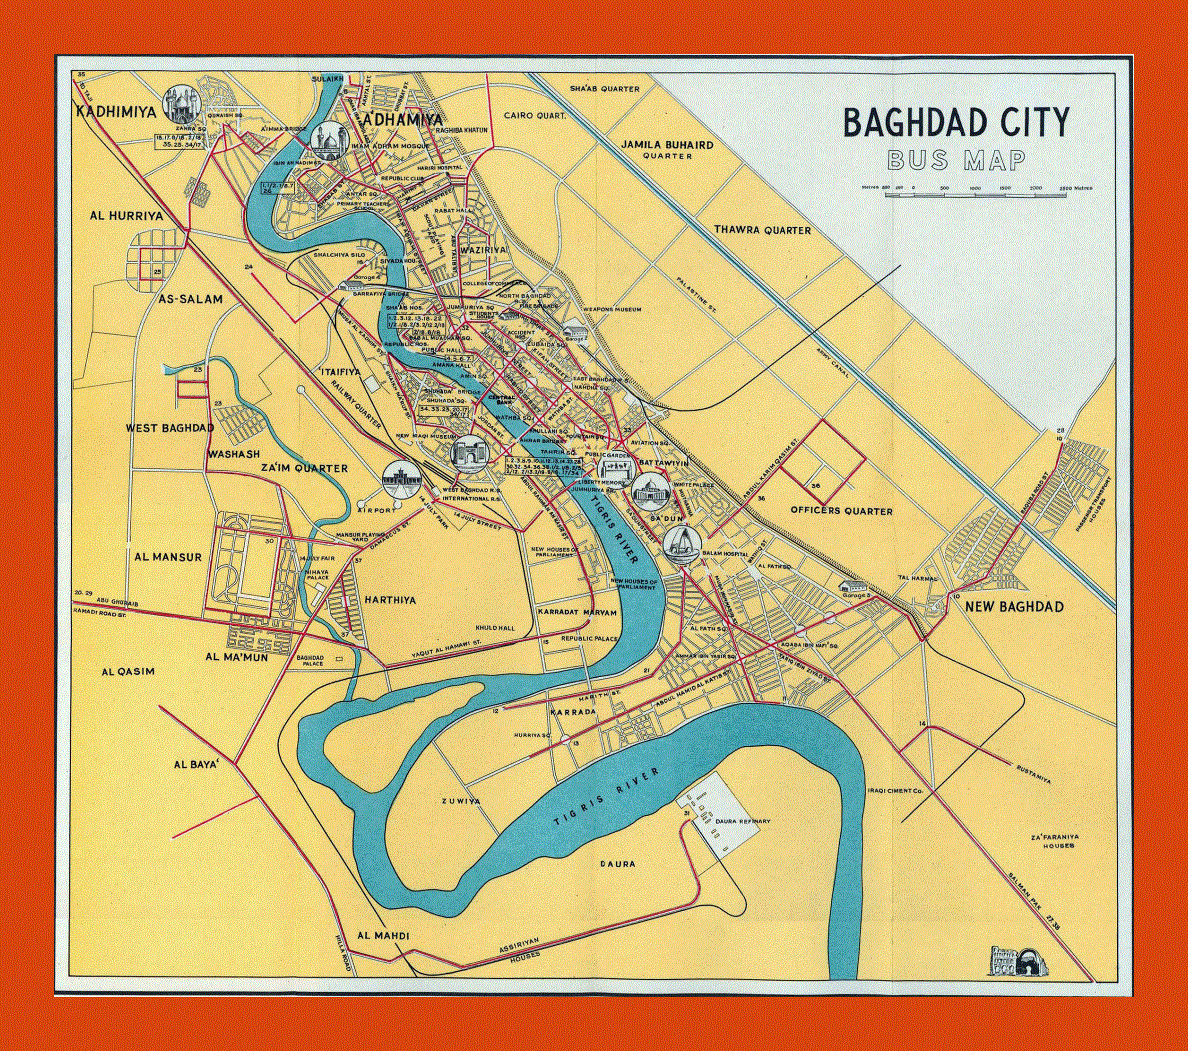 Bus map of Baghdad city - 1961